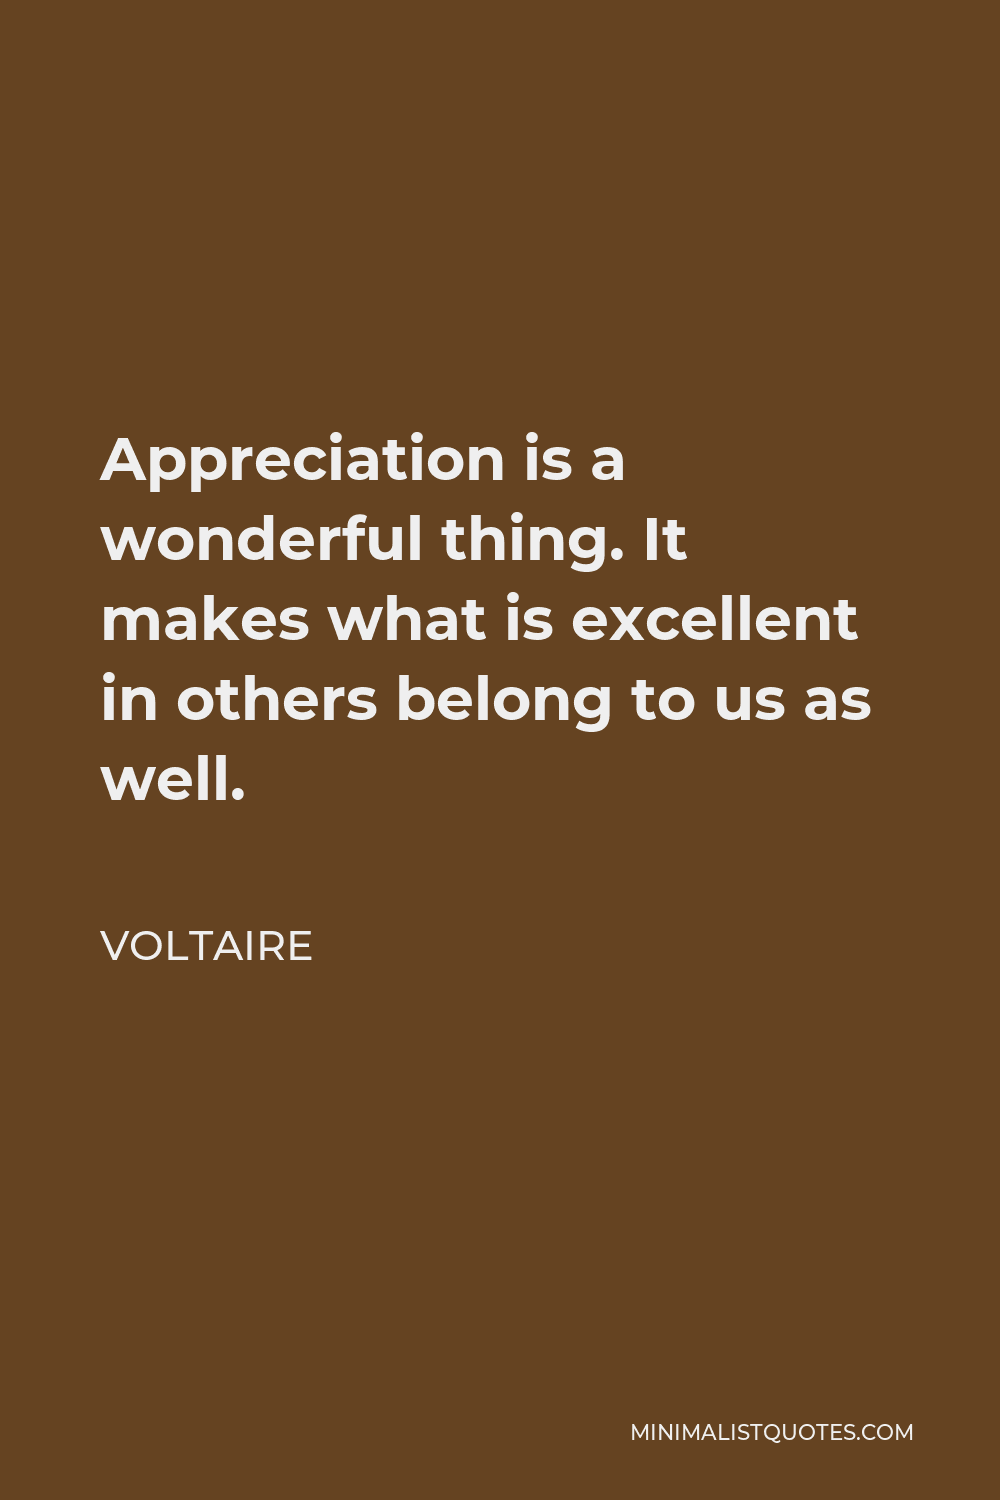 Voltaire Quote - Appreciation is a wonderful thing. It makes what is excellent in others belong to us as well.